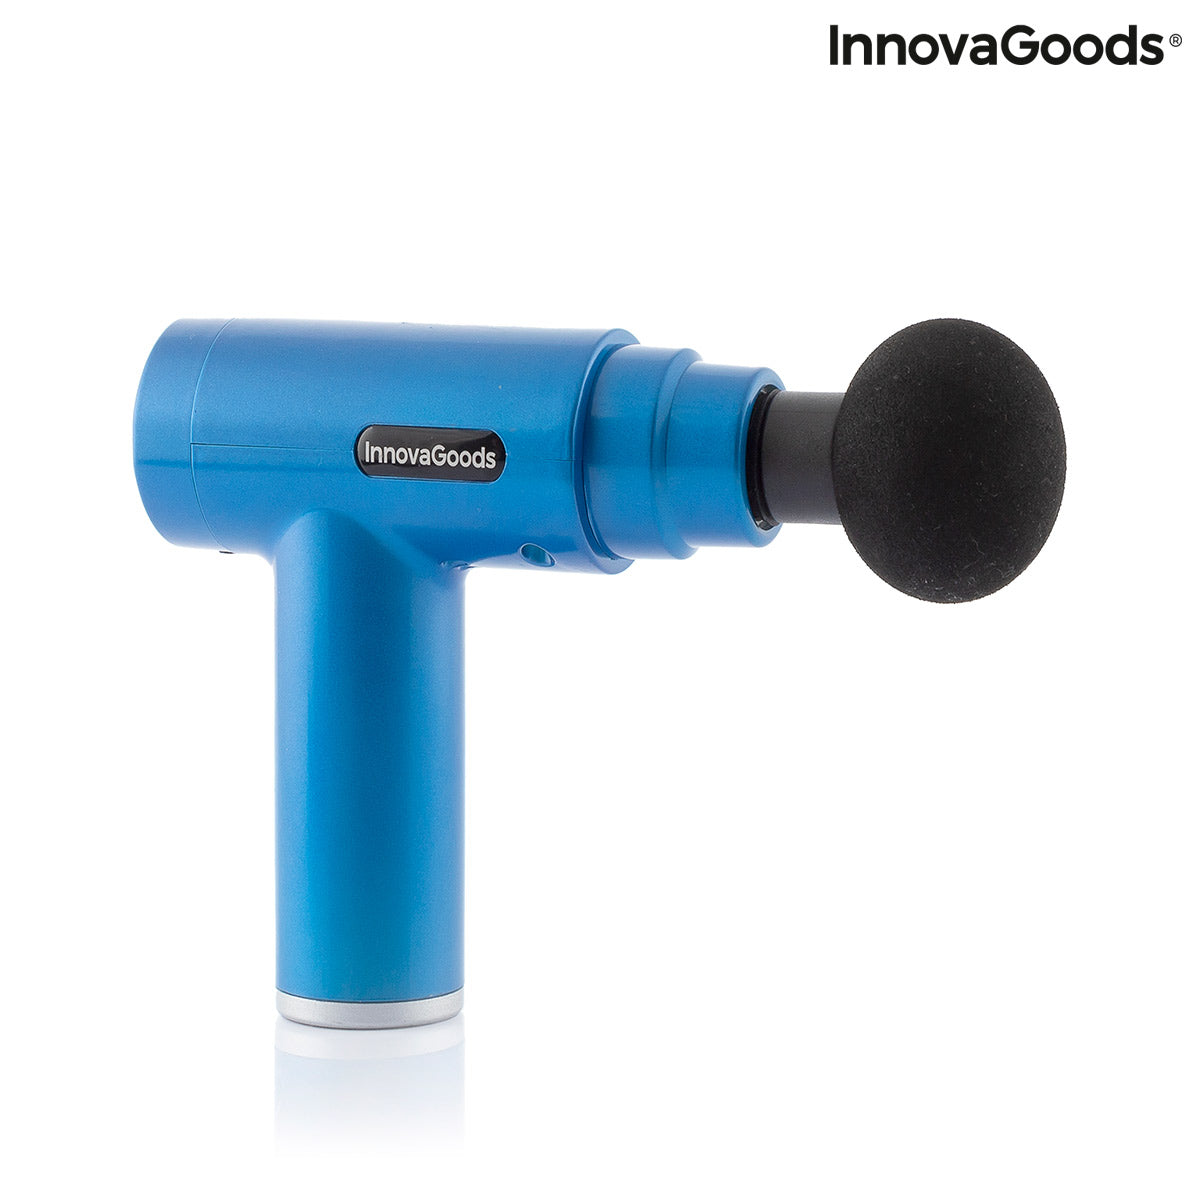 Innovagoods Mini Muscle Relaxation & Recovery Massager Gun - Blue | 823245 from Innovagoods - DID Electrical